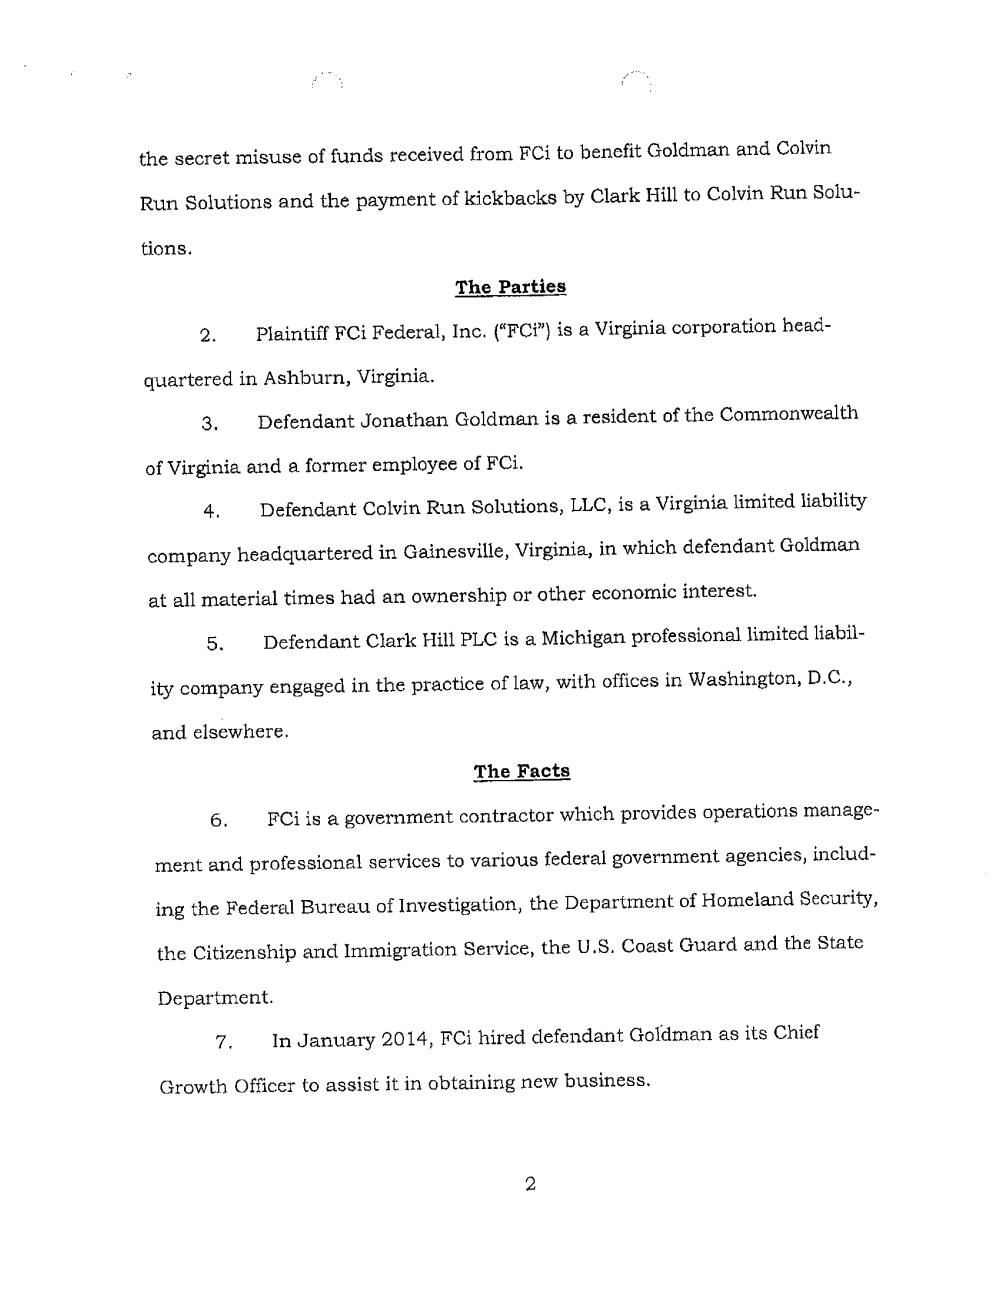 Page 3 from Clark Hill